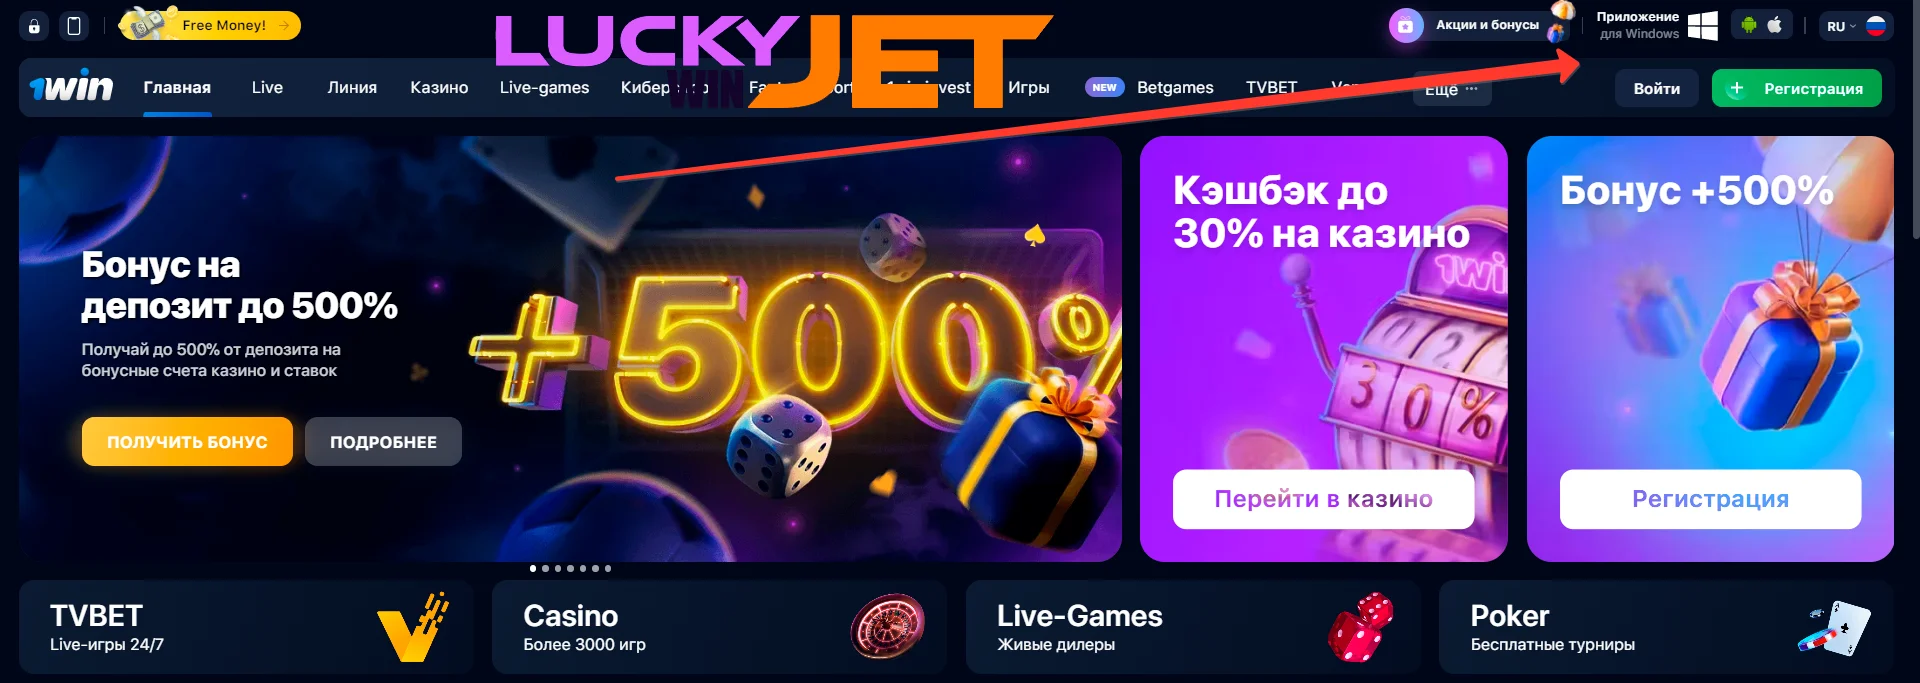 Download Lucky Jet